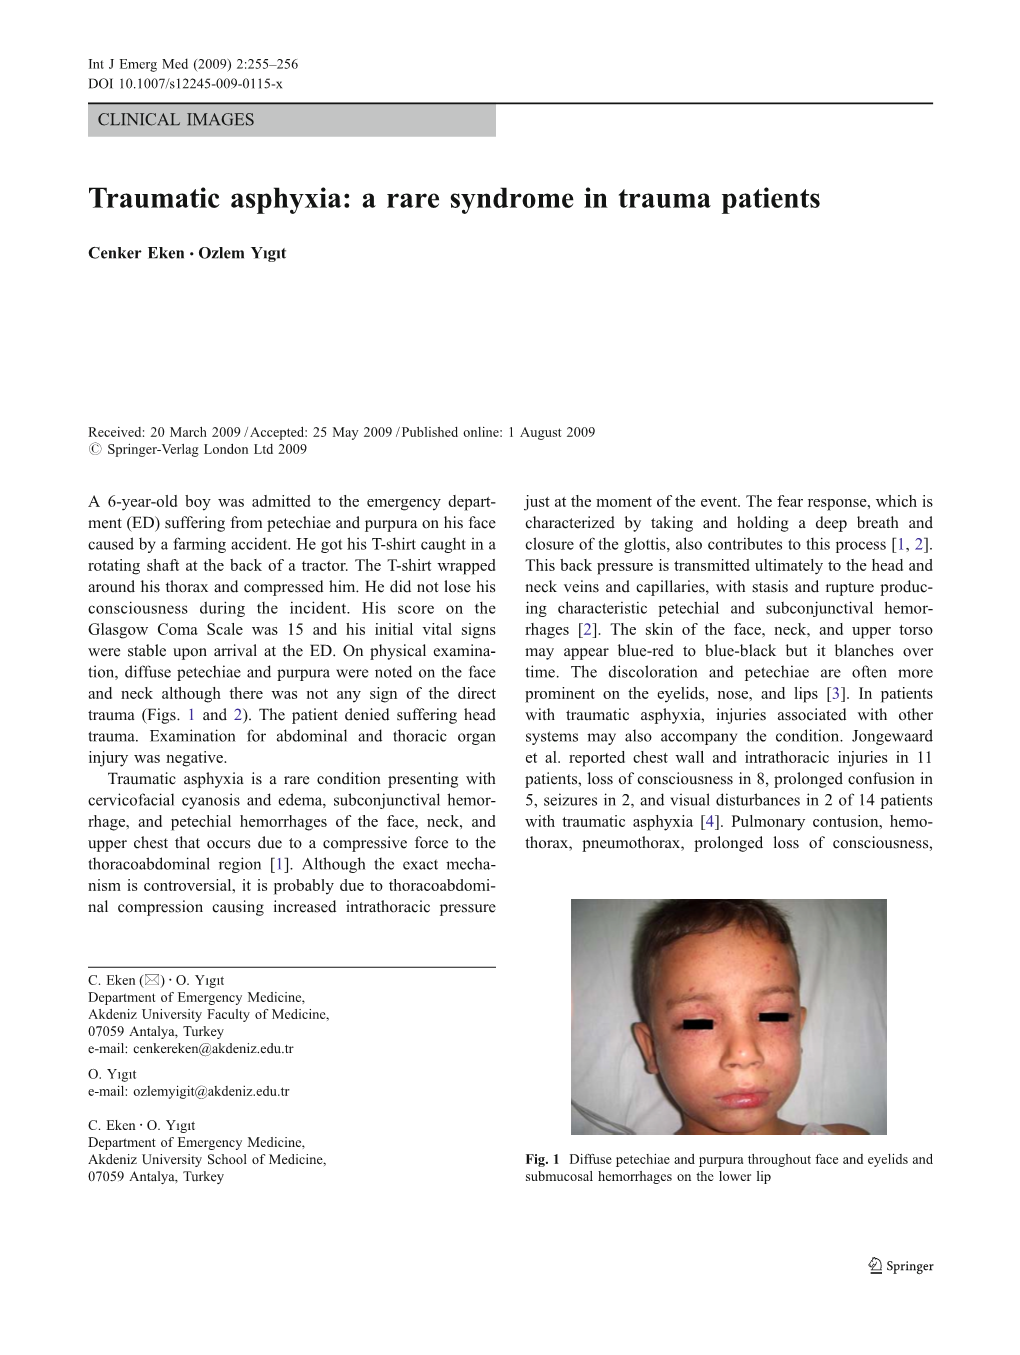 Traumatic Asphyxia: a Rare Syndrome in Trauma Patients